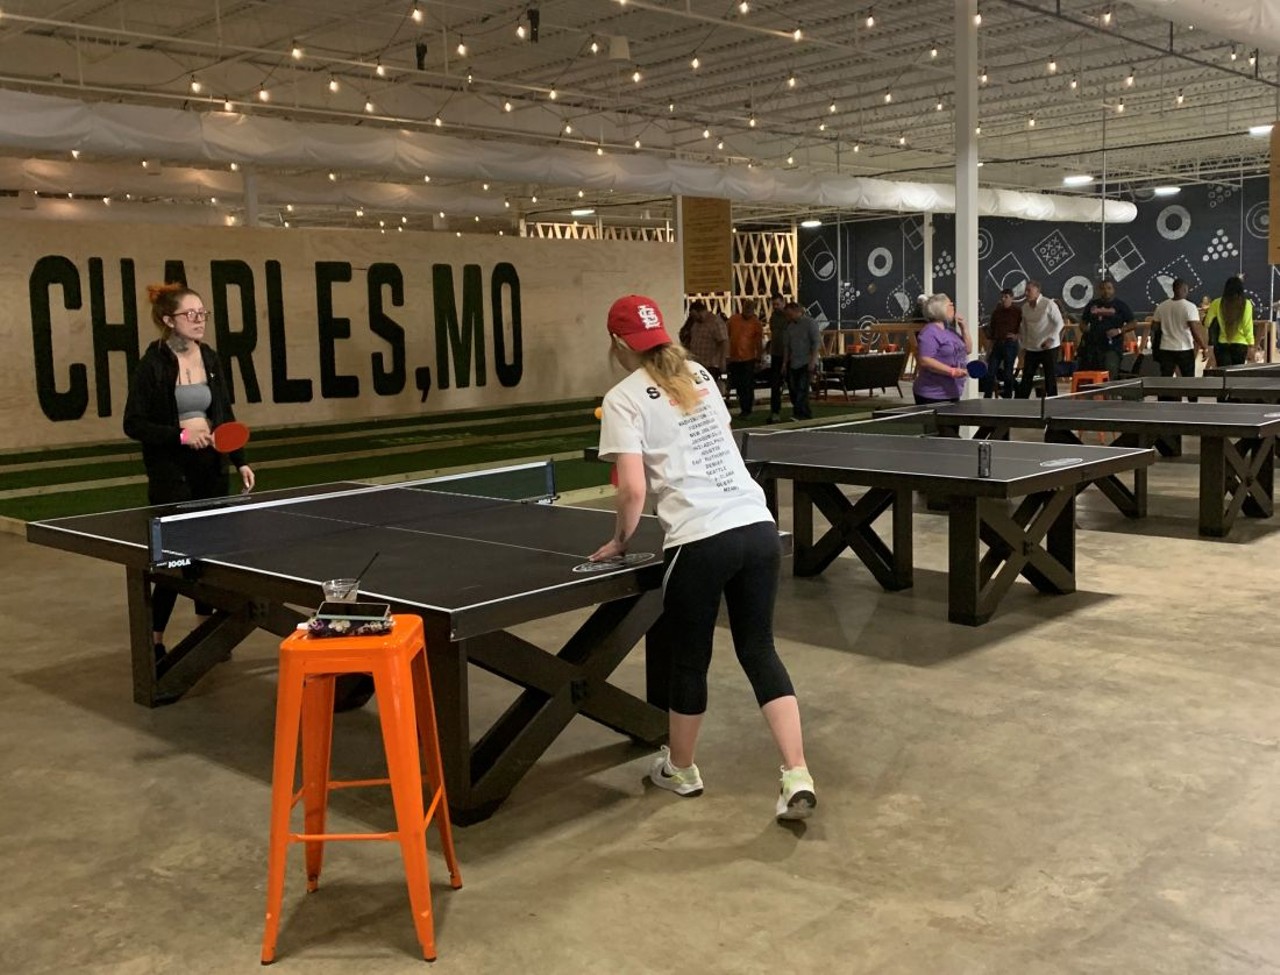 Ping Pong
(800 S Duchesne Dr, St Charles, MO 63301)
Photo credit: Riverfront Times / @riverfronttimes on Instagram